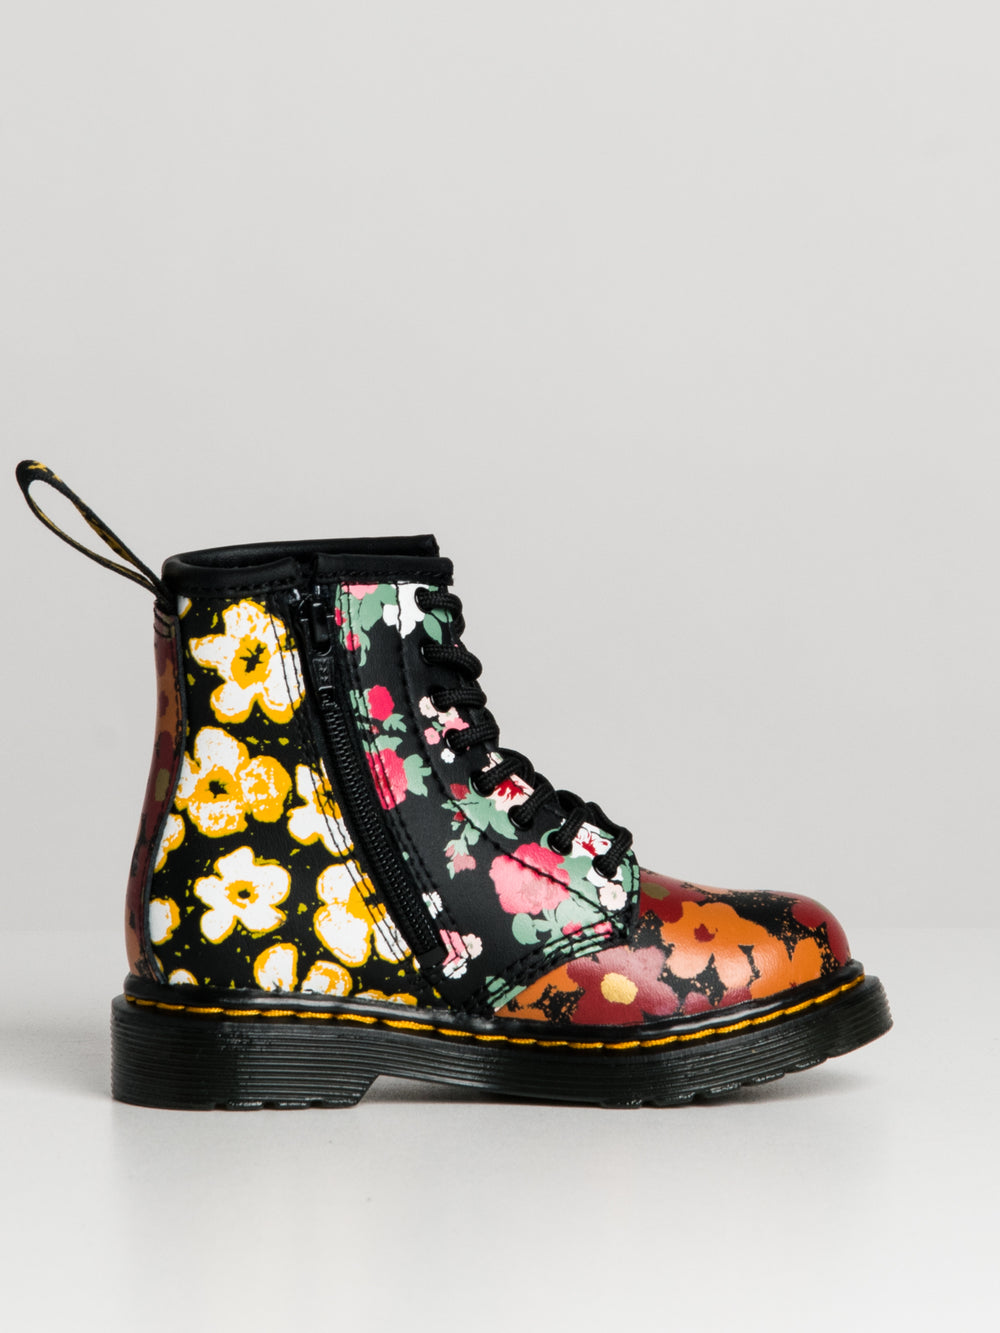 DR MARTENS TODDLER 1460 FLORAL MASH UP HYDRO BOOTS - CLEARANCE